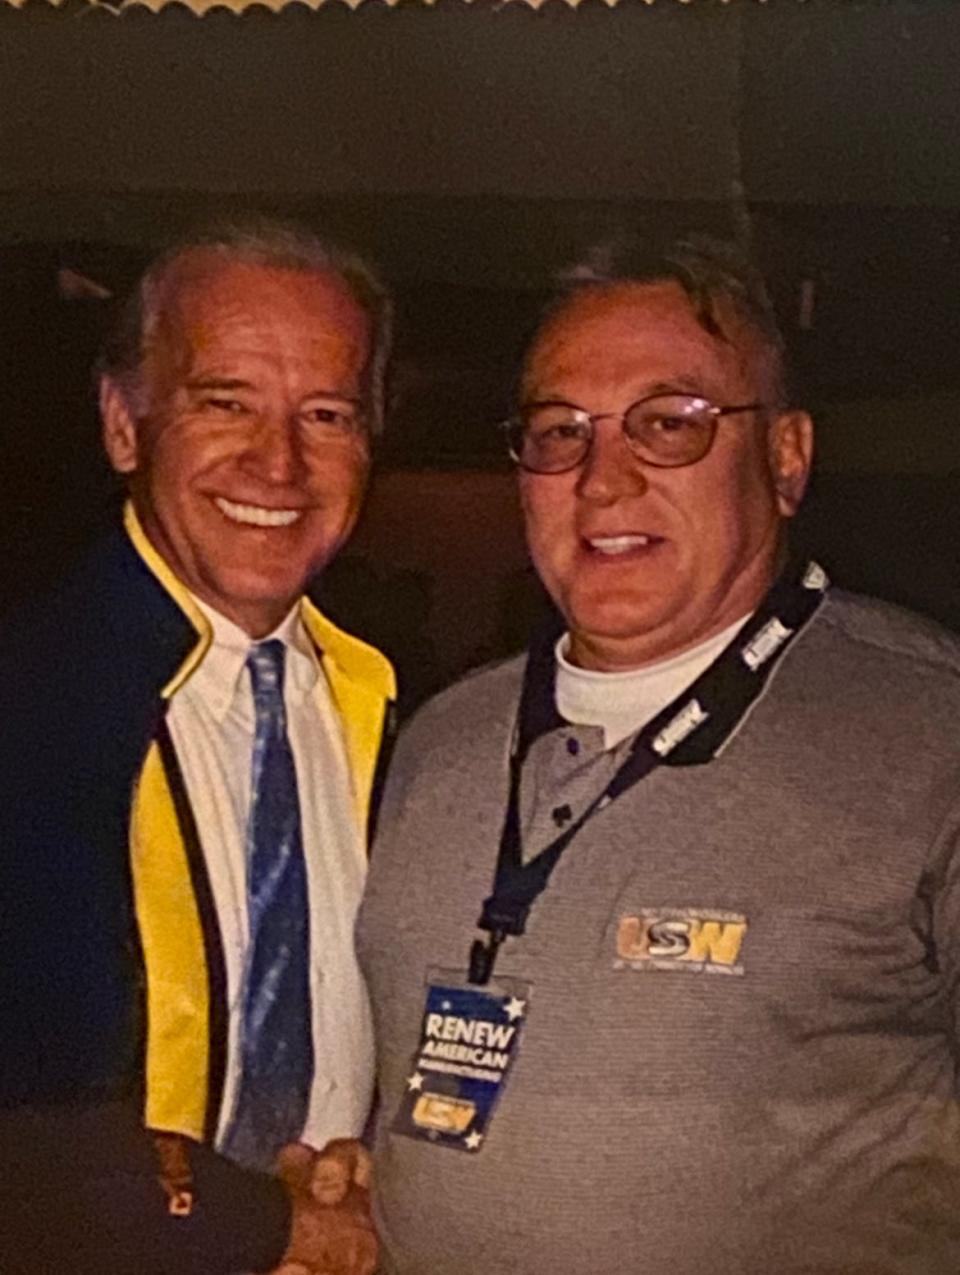 Randy Feemster, who briefly met John F. Kennedy in Canton after he gave a presidential campaign speech in 1960, has met other political notables who have become president, such as Joe Biden. Feemster is vice chair of the Democratic Party in Tuscarawas County.